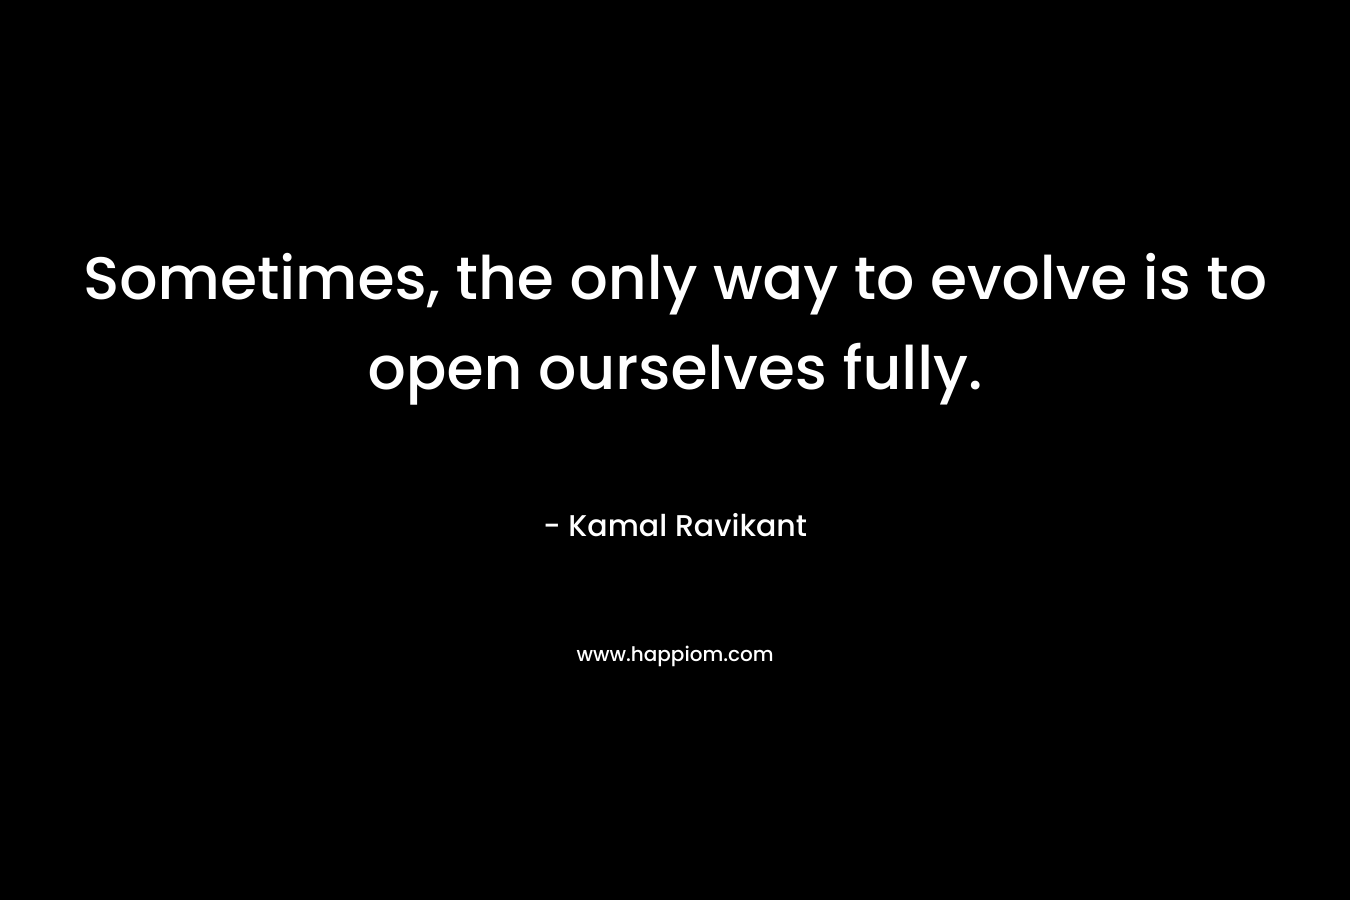 Sometimes, the only way to evolve is to open ourselves fully.